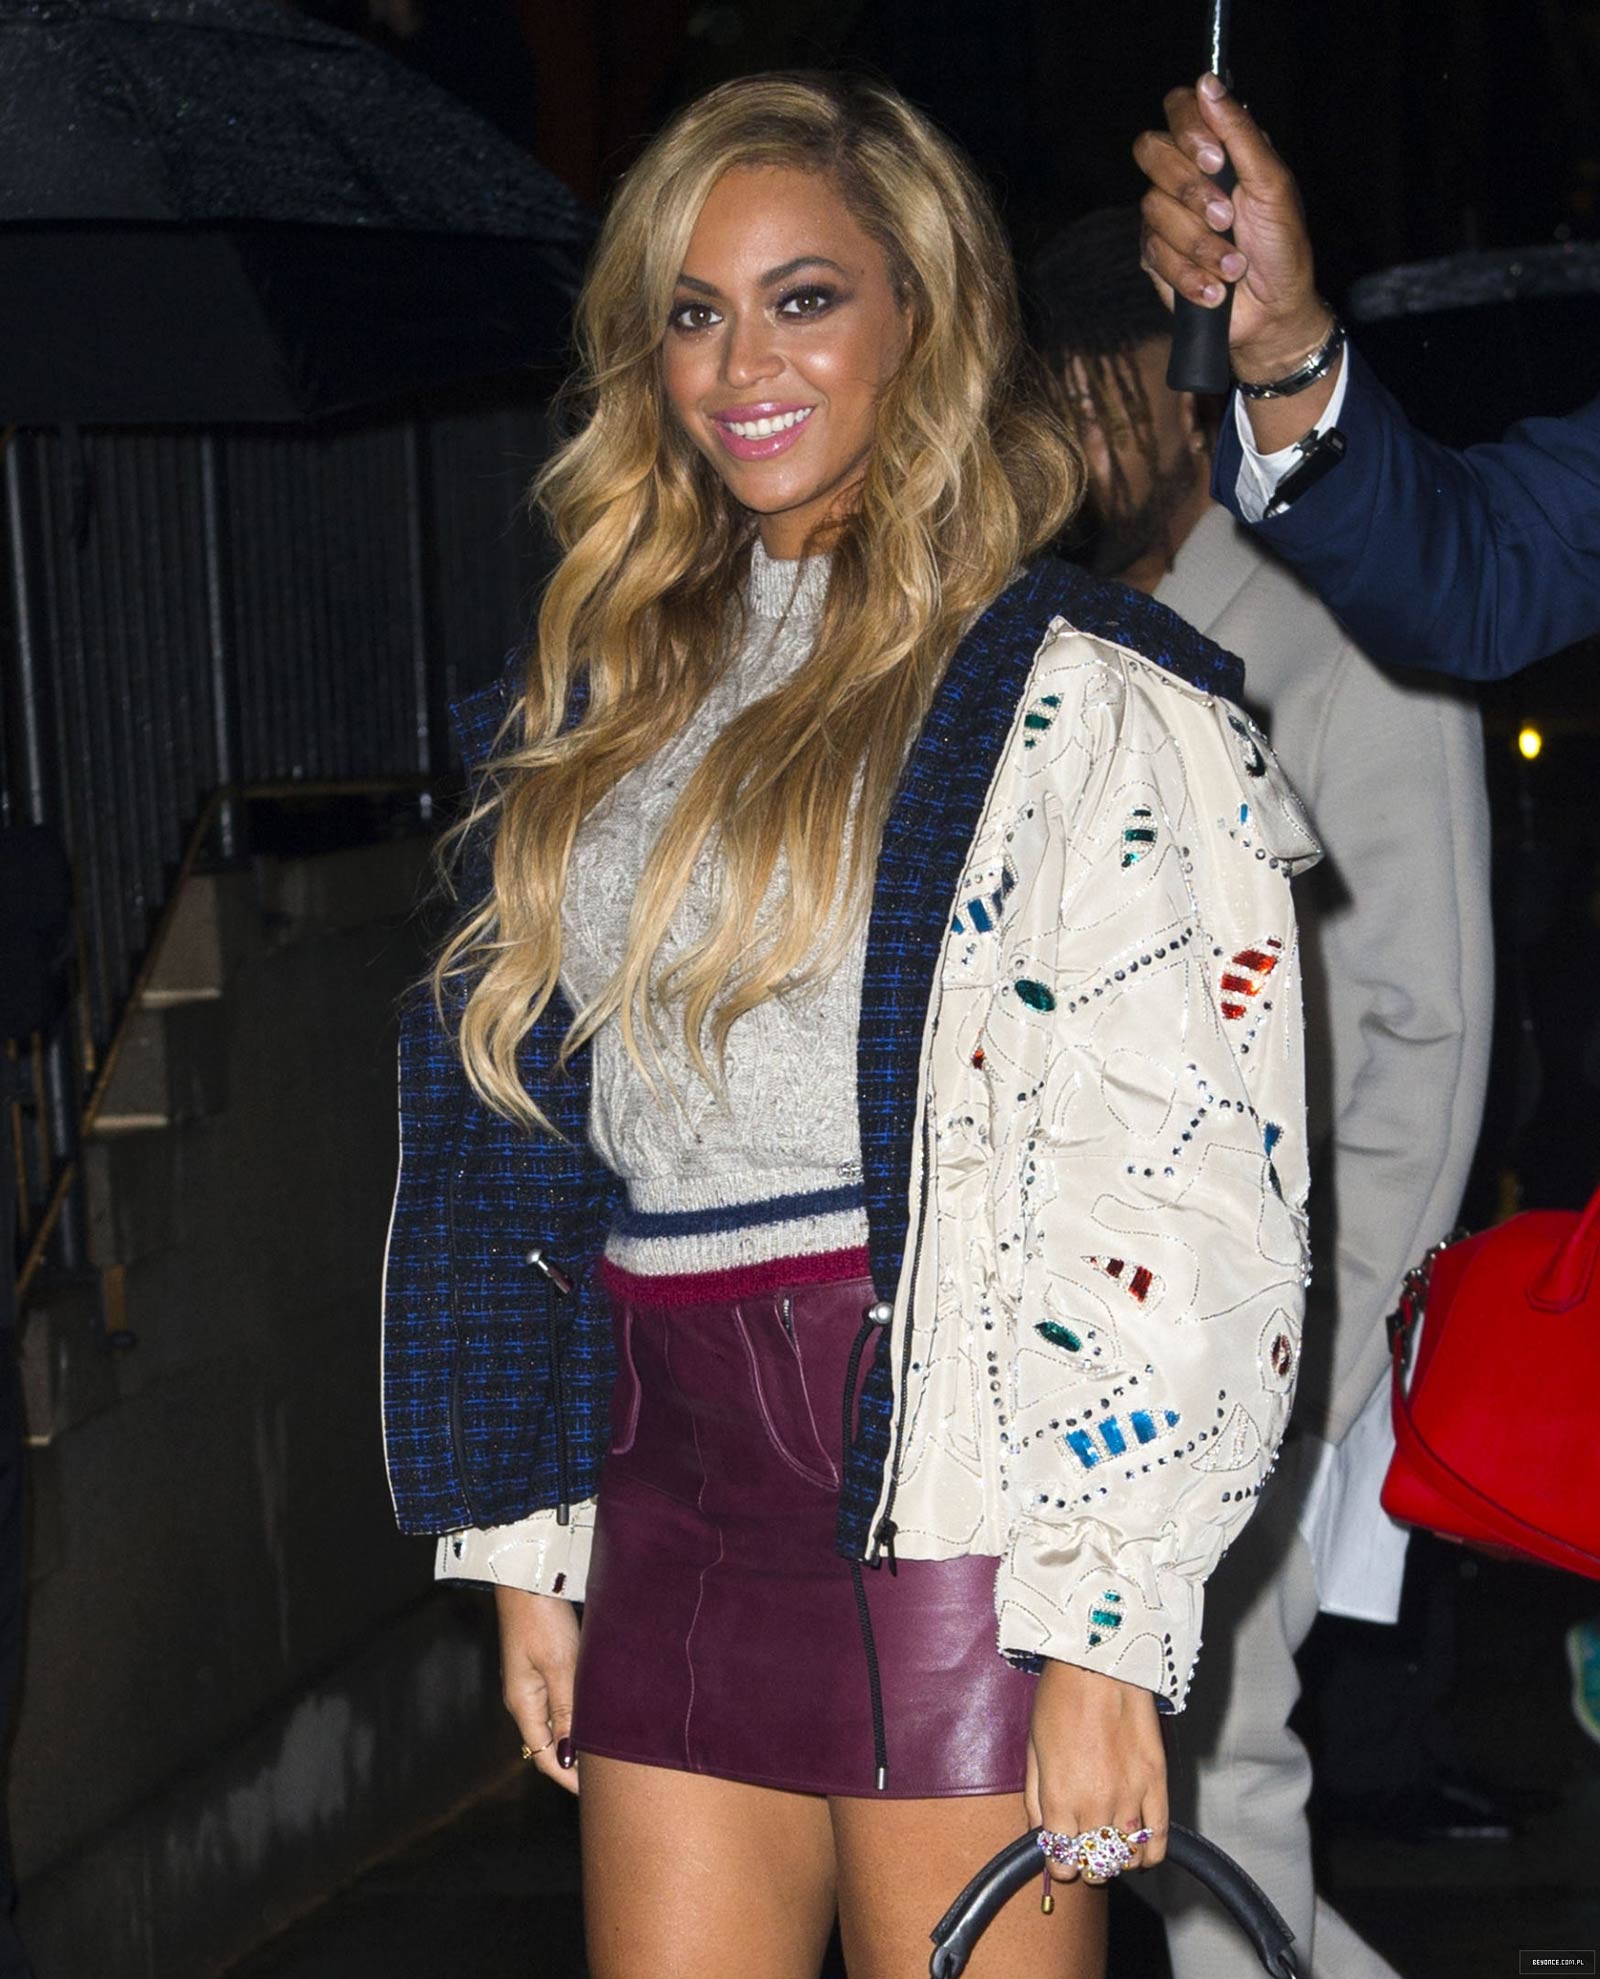 Beyonce at the Chanel Fashion Show in New York City